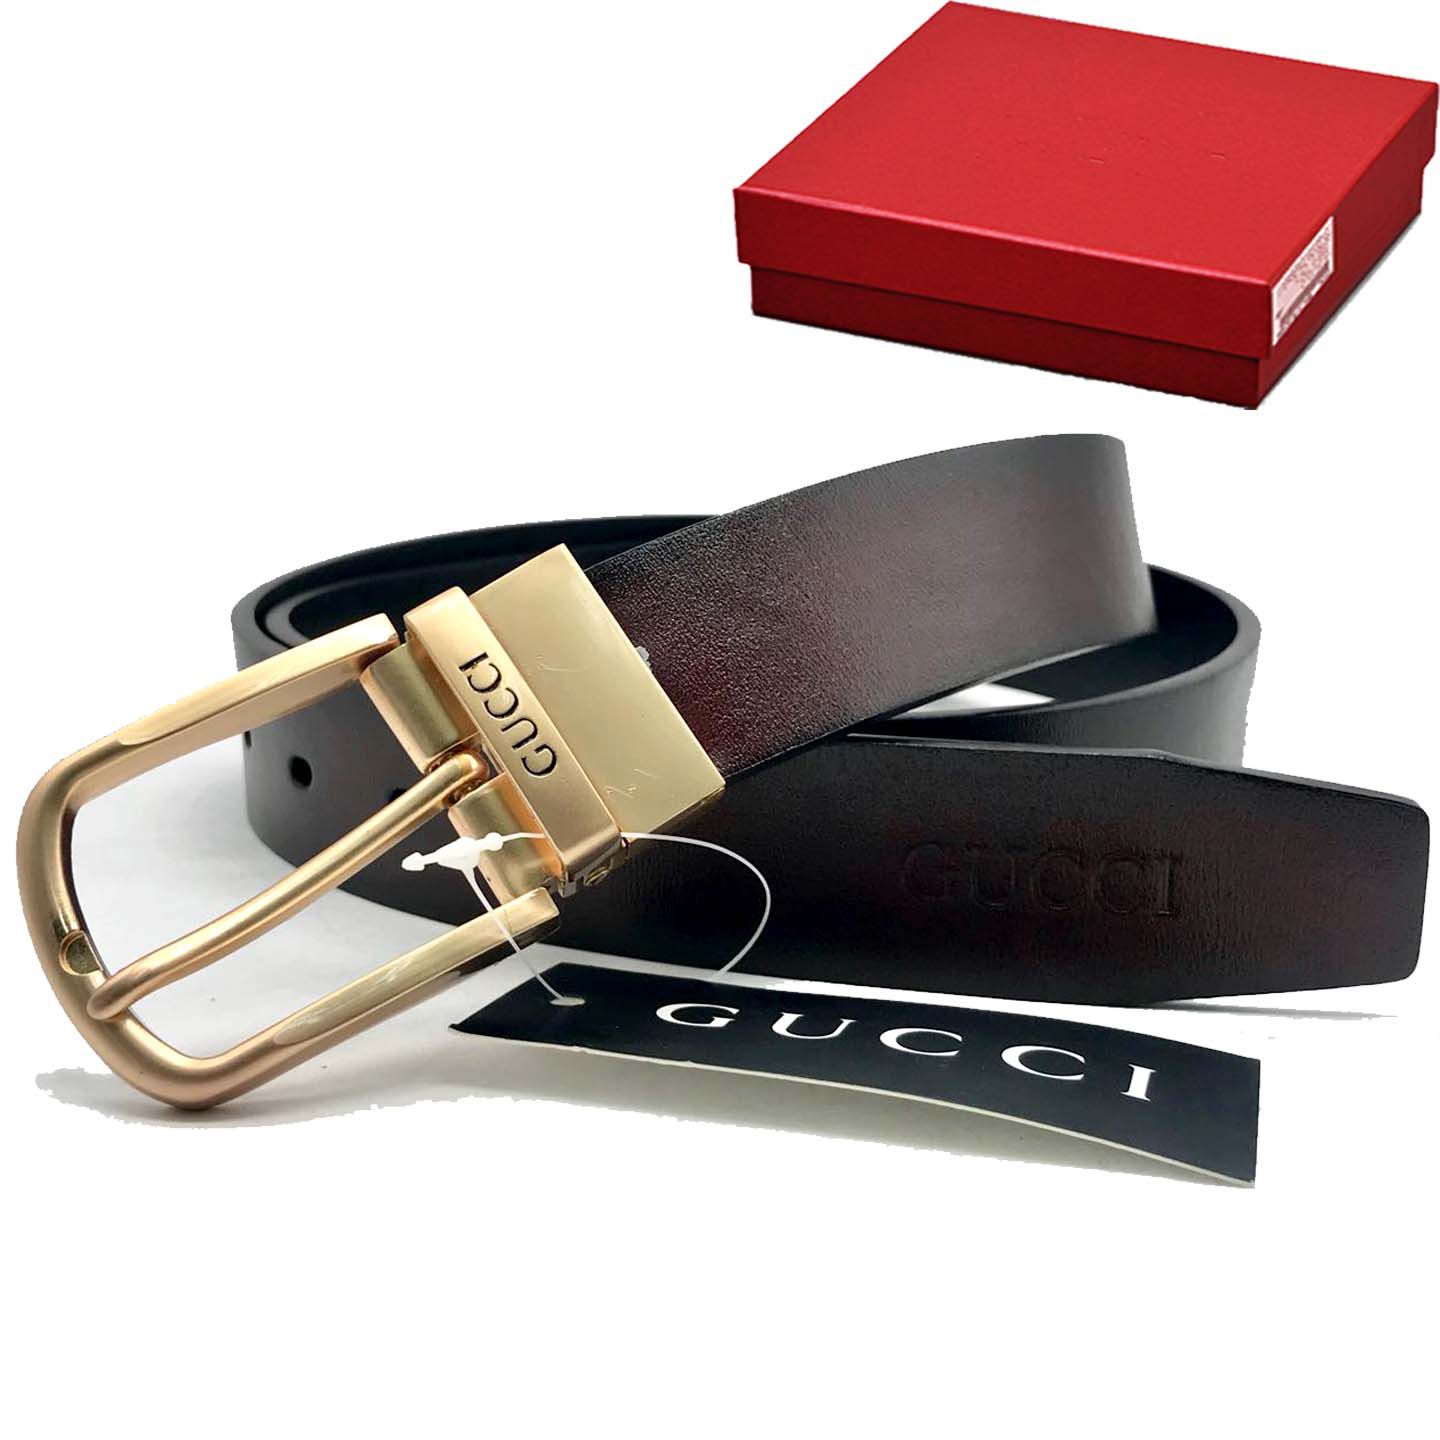 gucci t Brown Leather Formal Belt - Pack of 1: Buy Online at Low Price in India - Snapdeal